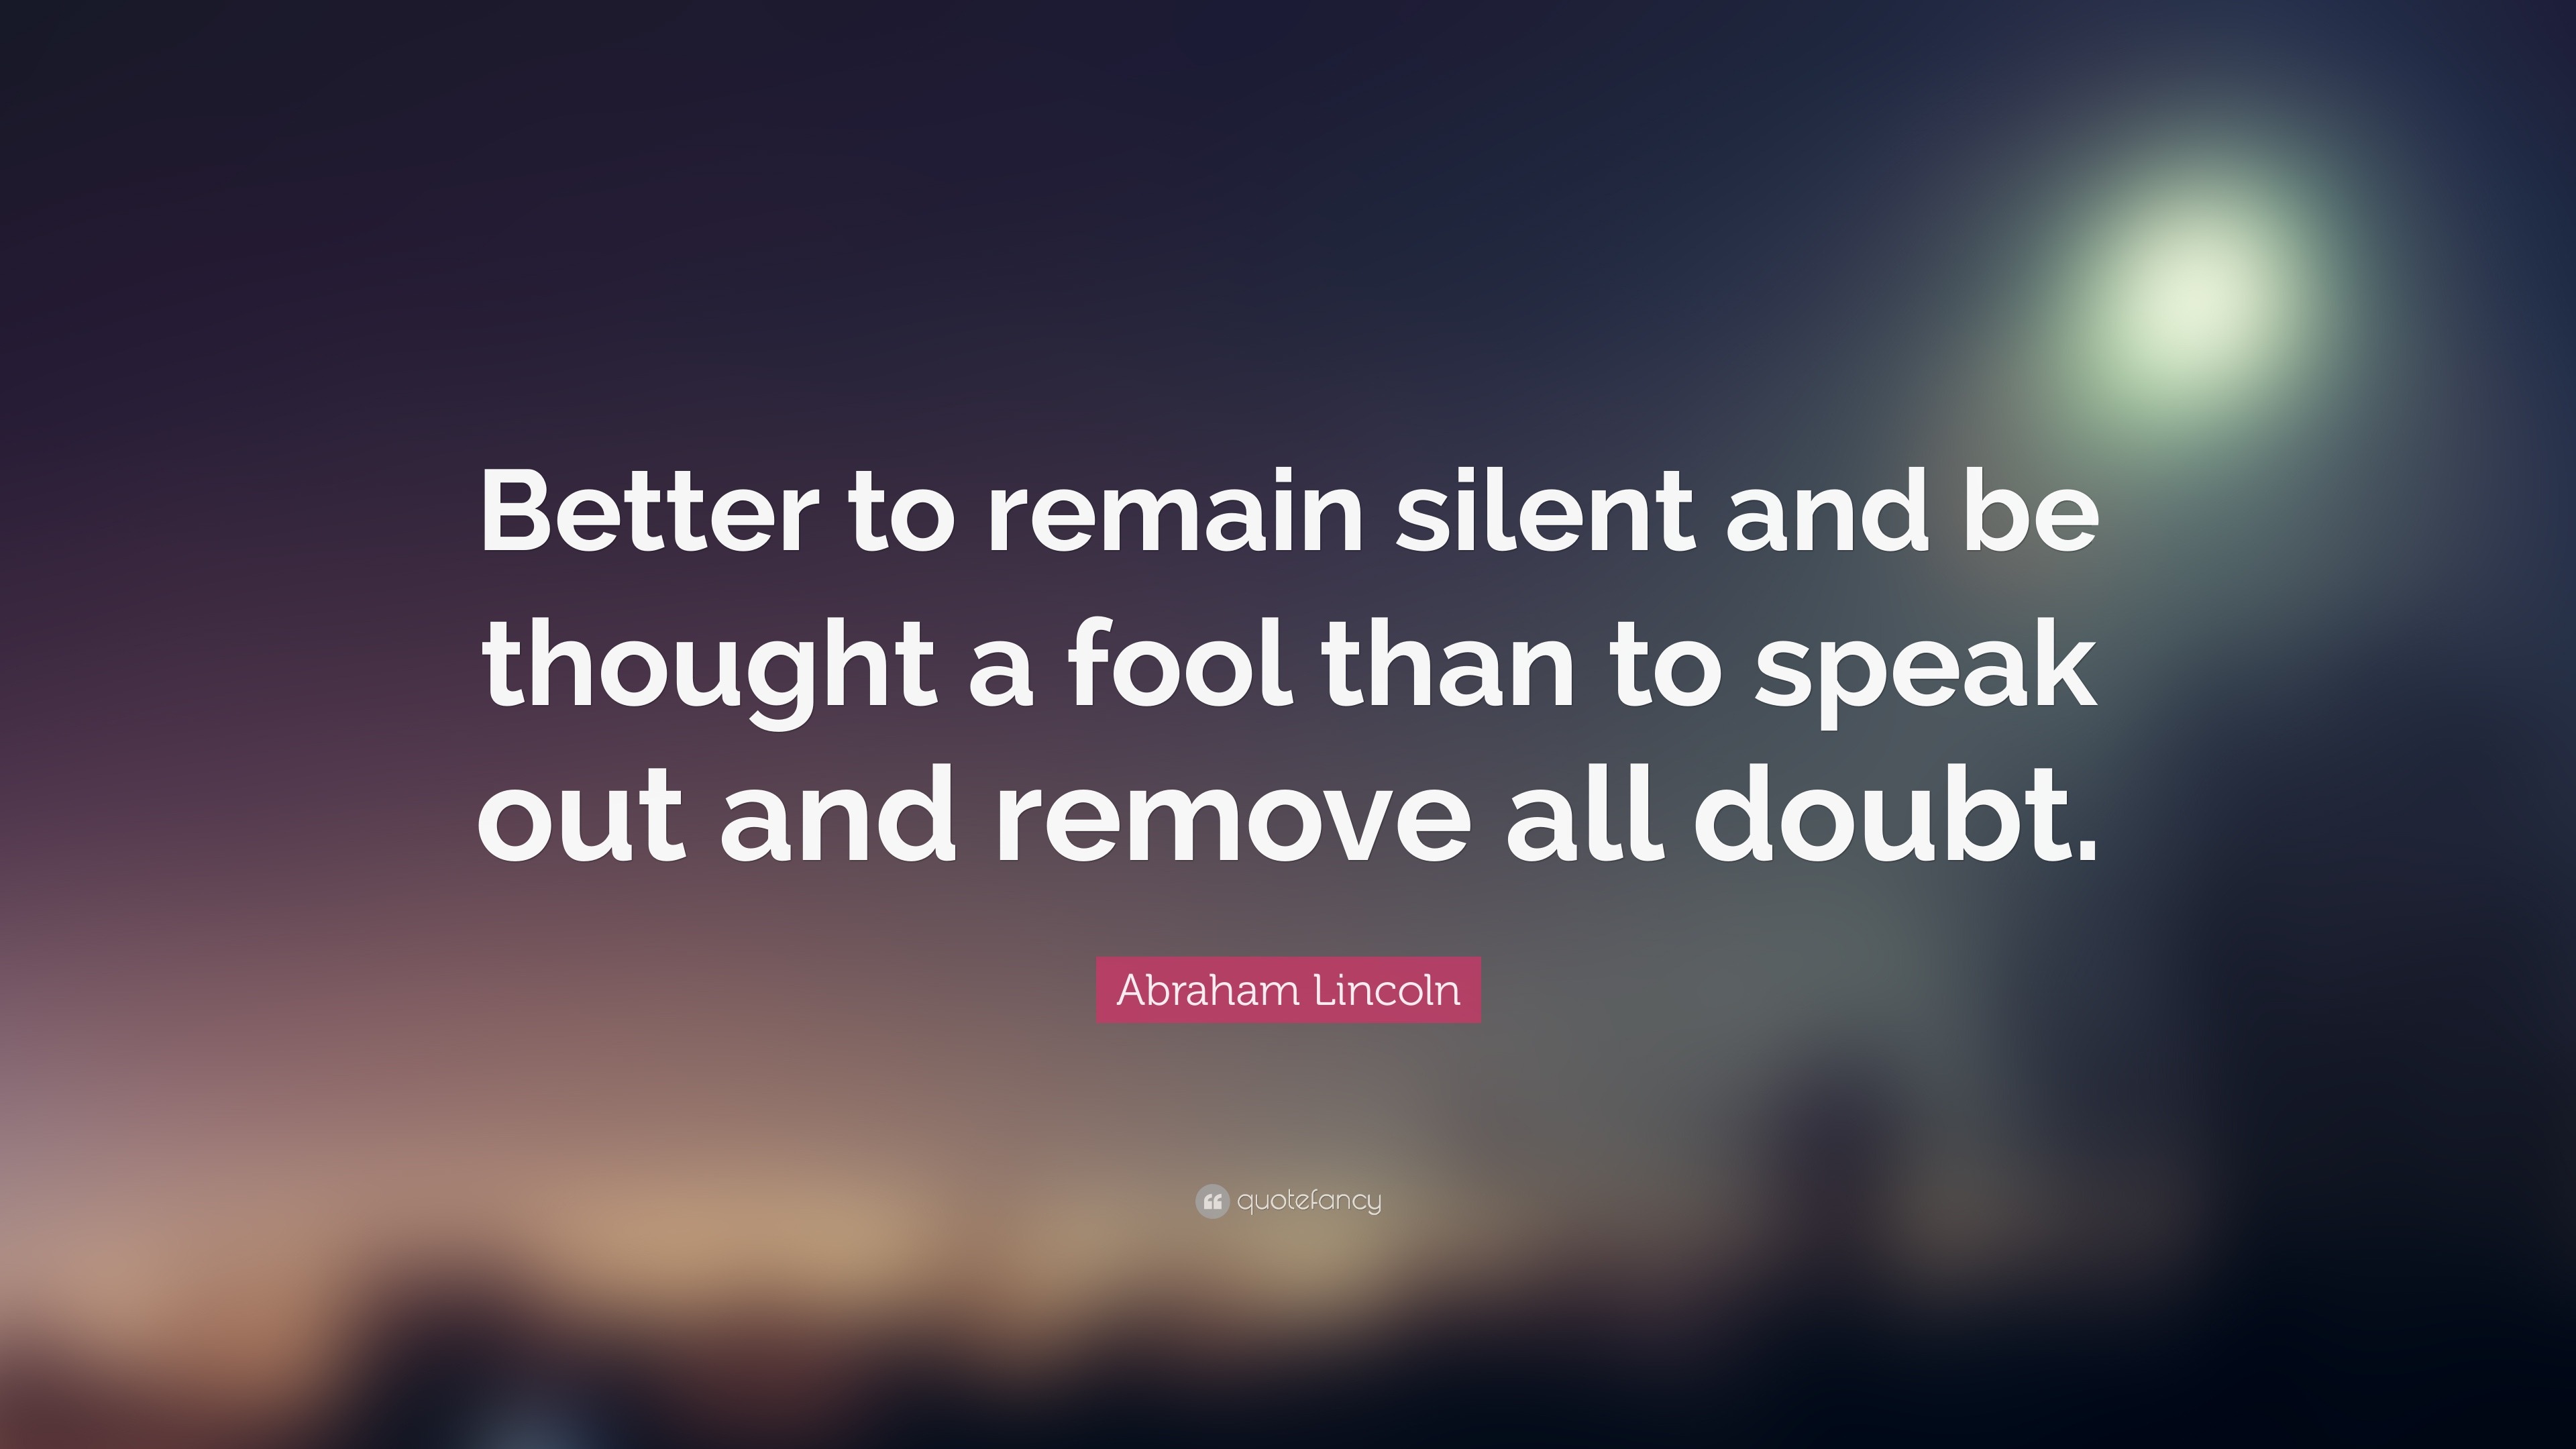 Abraham Lincoln Quote: "Better to remain silent and be ...